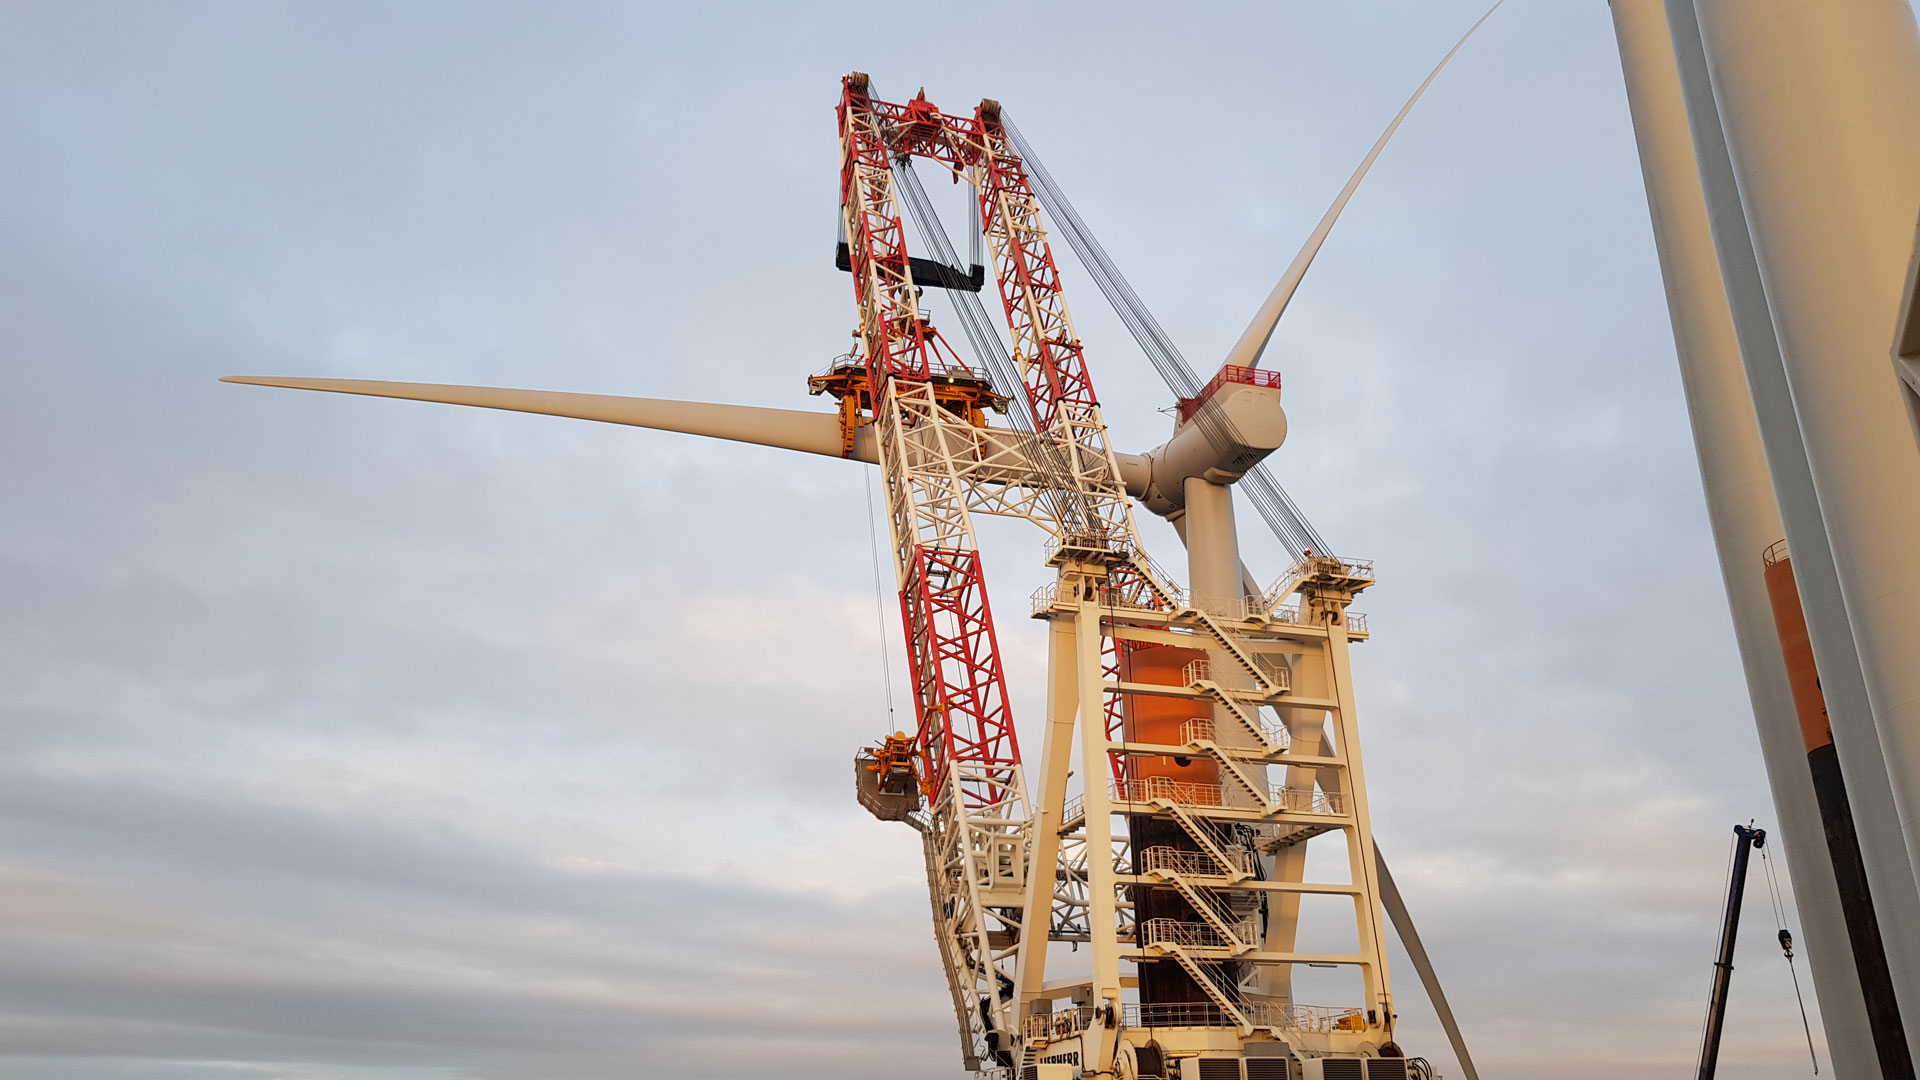 First Turbine in at Denmark's Largest Offshore Wind Farm